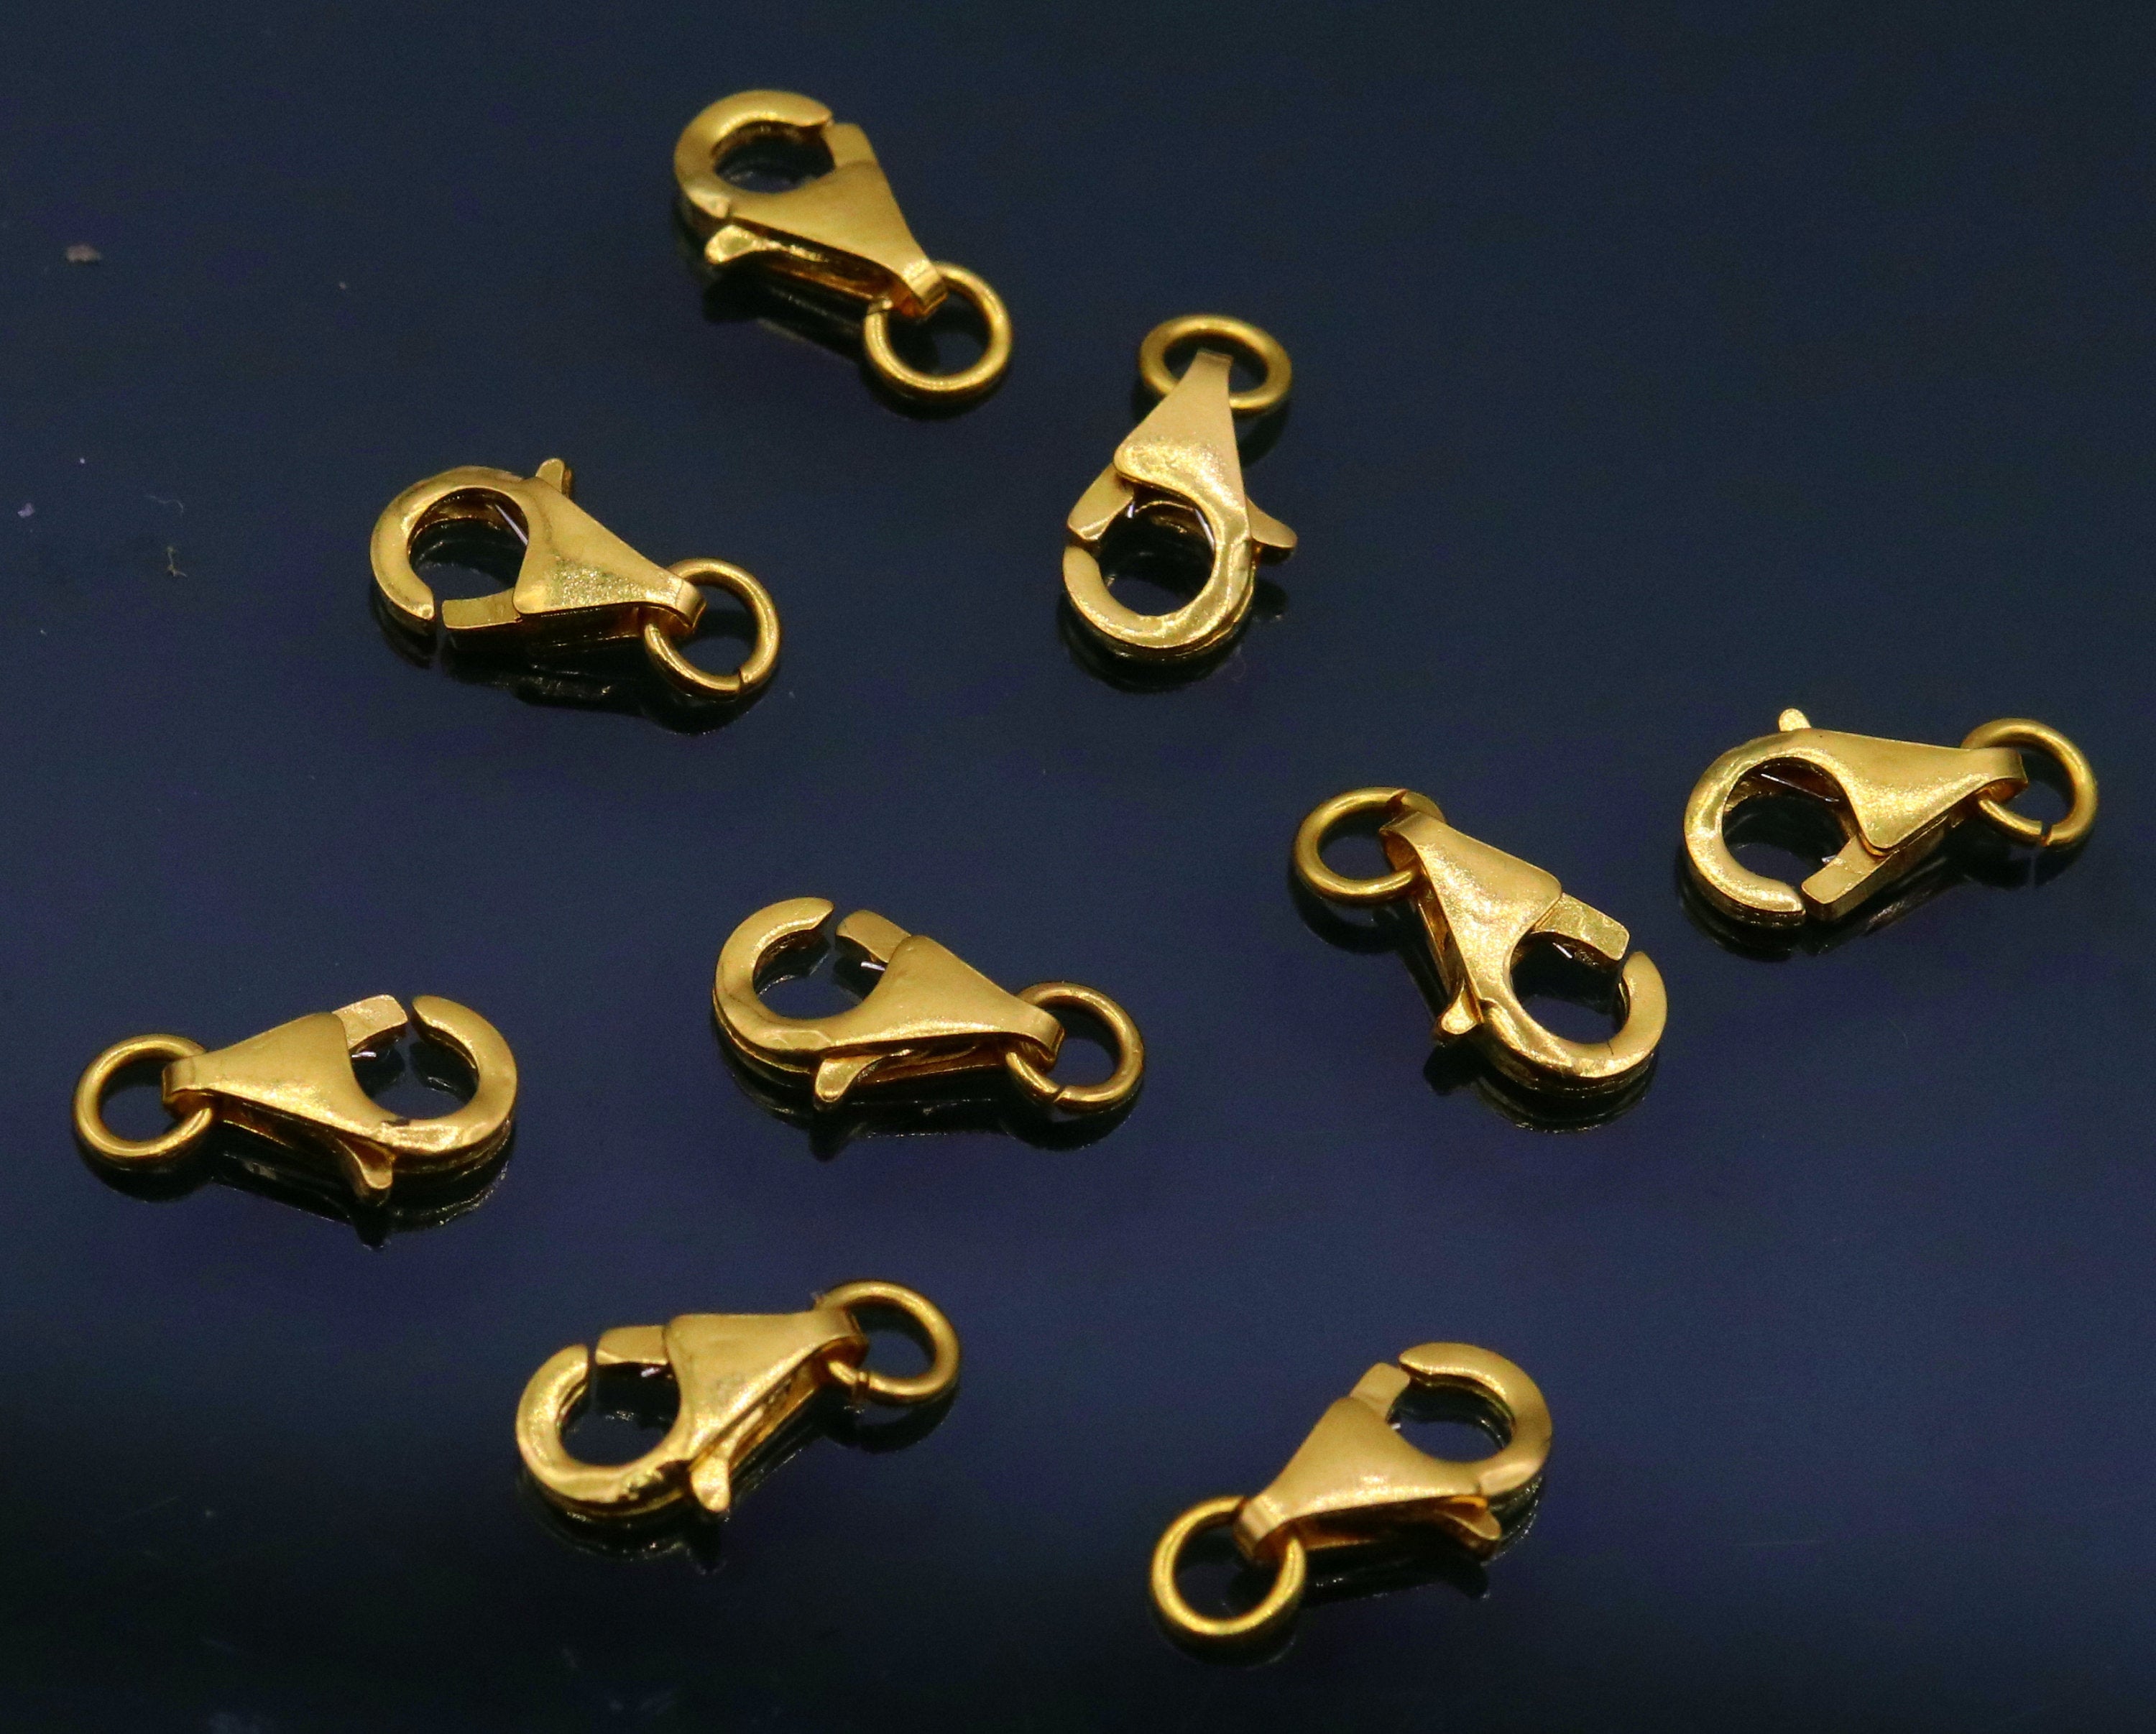 Buy 15 Pcs Gold Lobster Clamp, Gold Clasp, Necklace or Bracelet Closures,  Clasps for Jewelry Making Online in India - Etsy